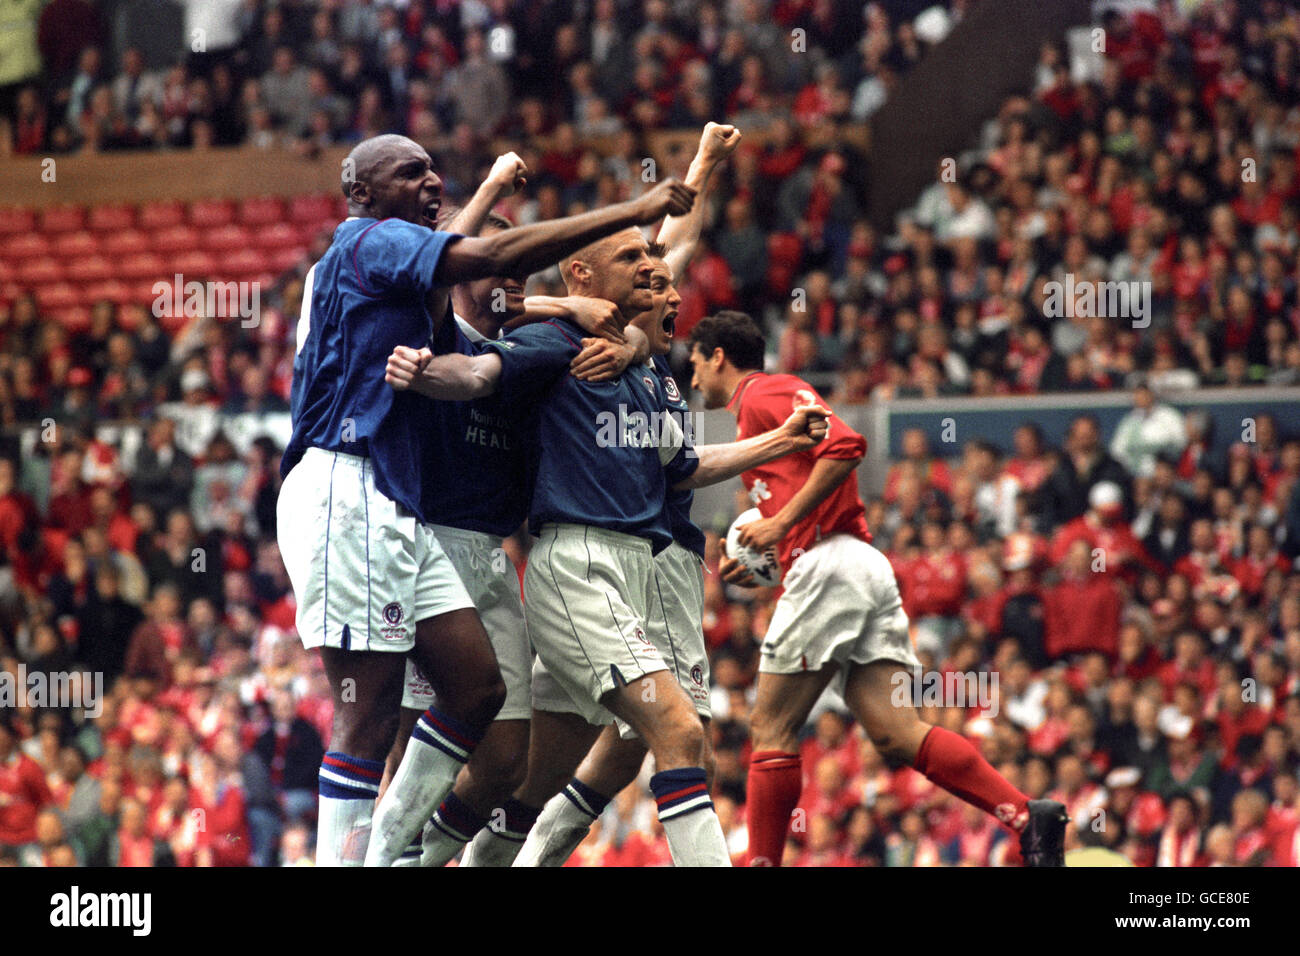 Soccer - FA Cup Semi Final - Chesterfield v Middlesbrough - Old Trafford. CHESTERFIELD'S SEAN DYCHE CELEBRATES HIS GOAL WITH TEAM MATES Stock Photo